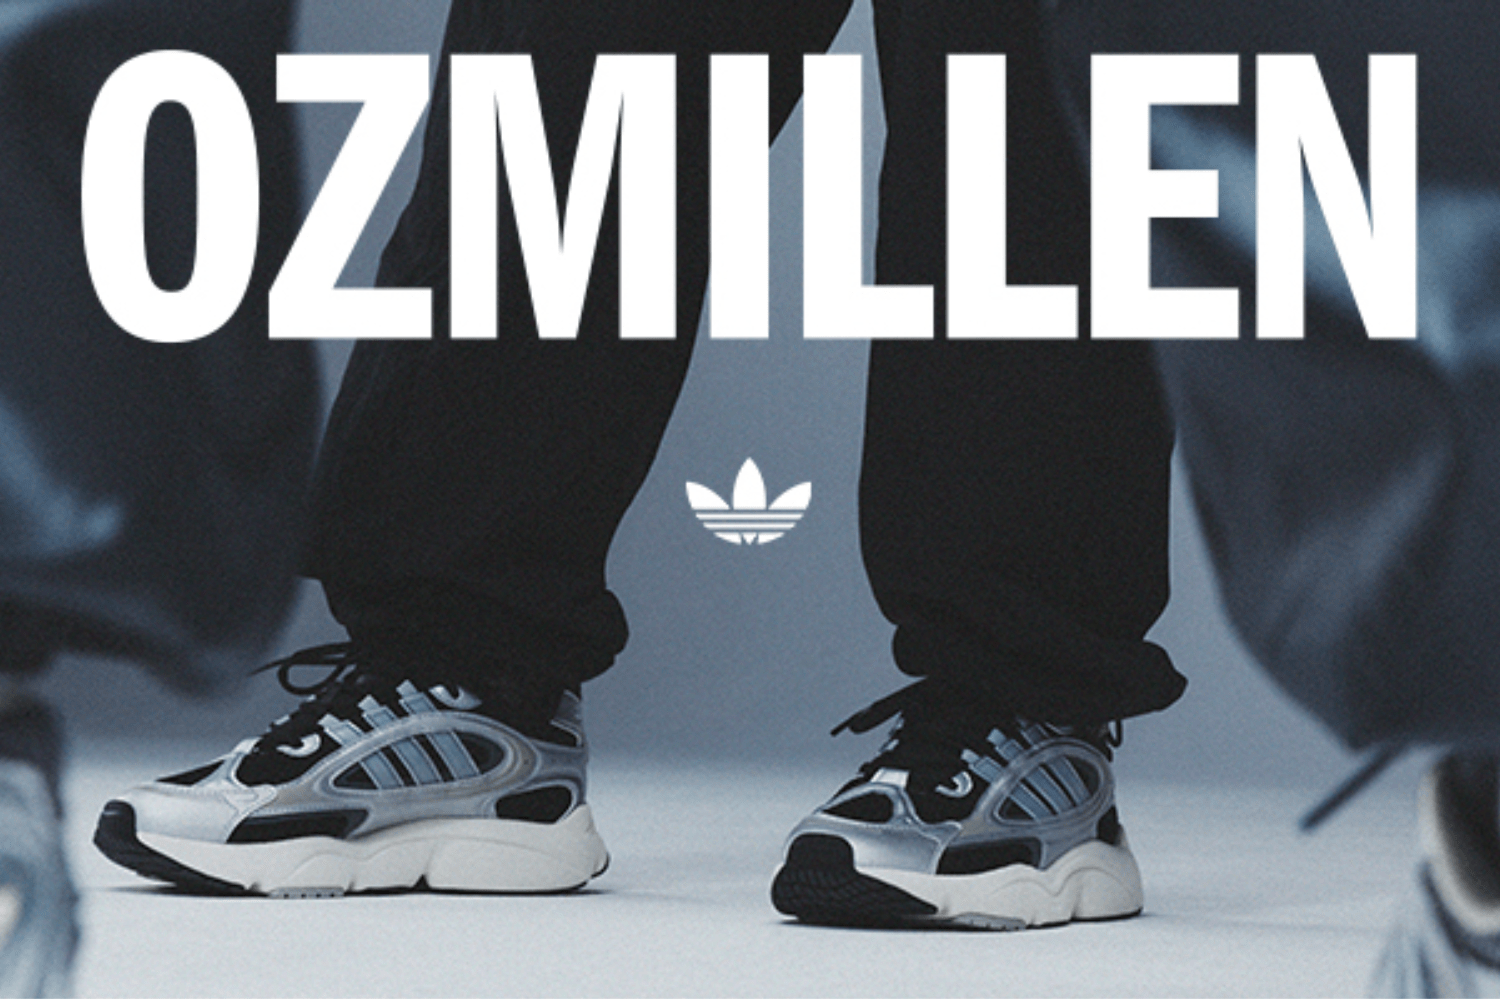 This is the new adidas Ozmillen